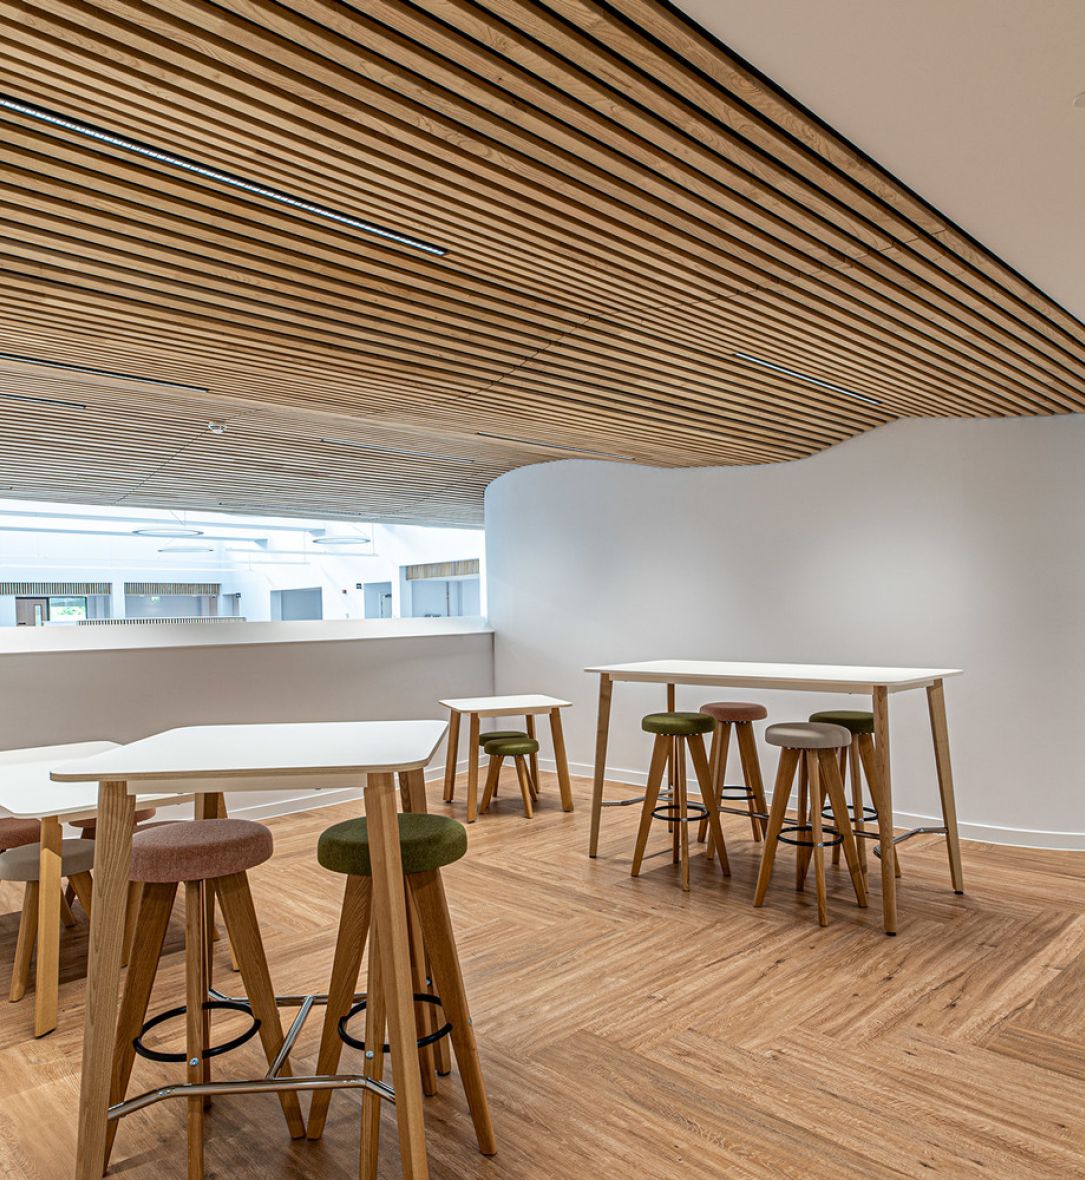 BCL Wood Ceilings at Berrows House